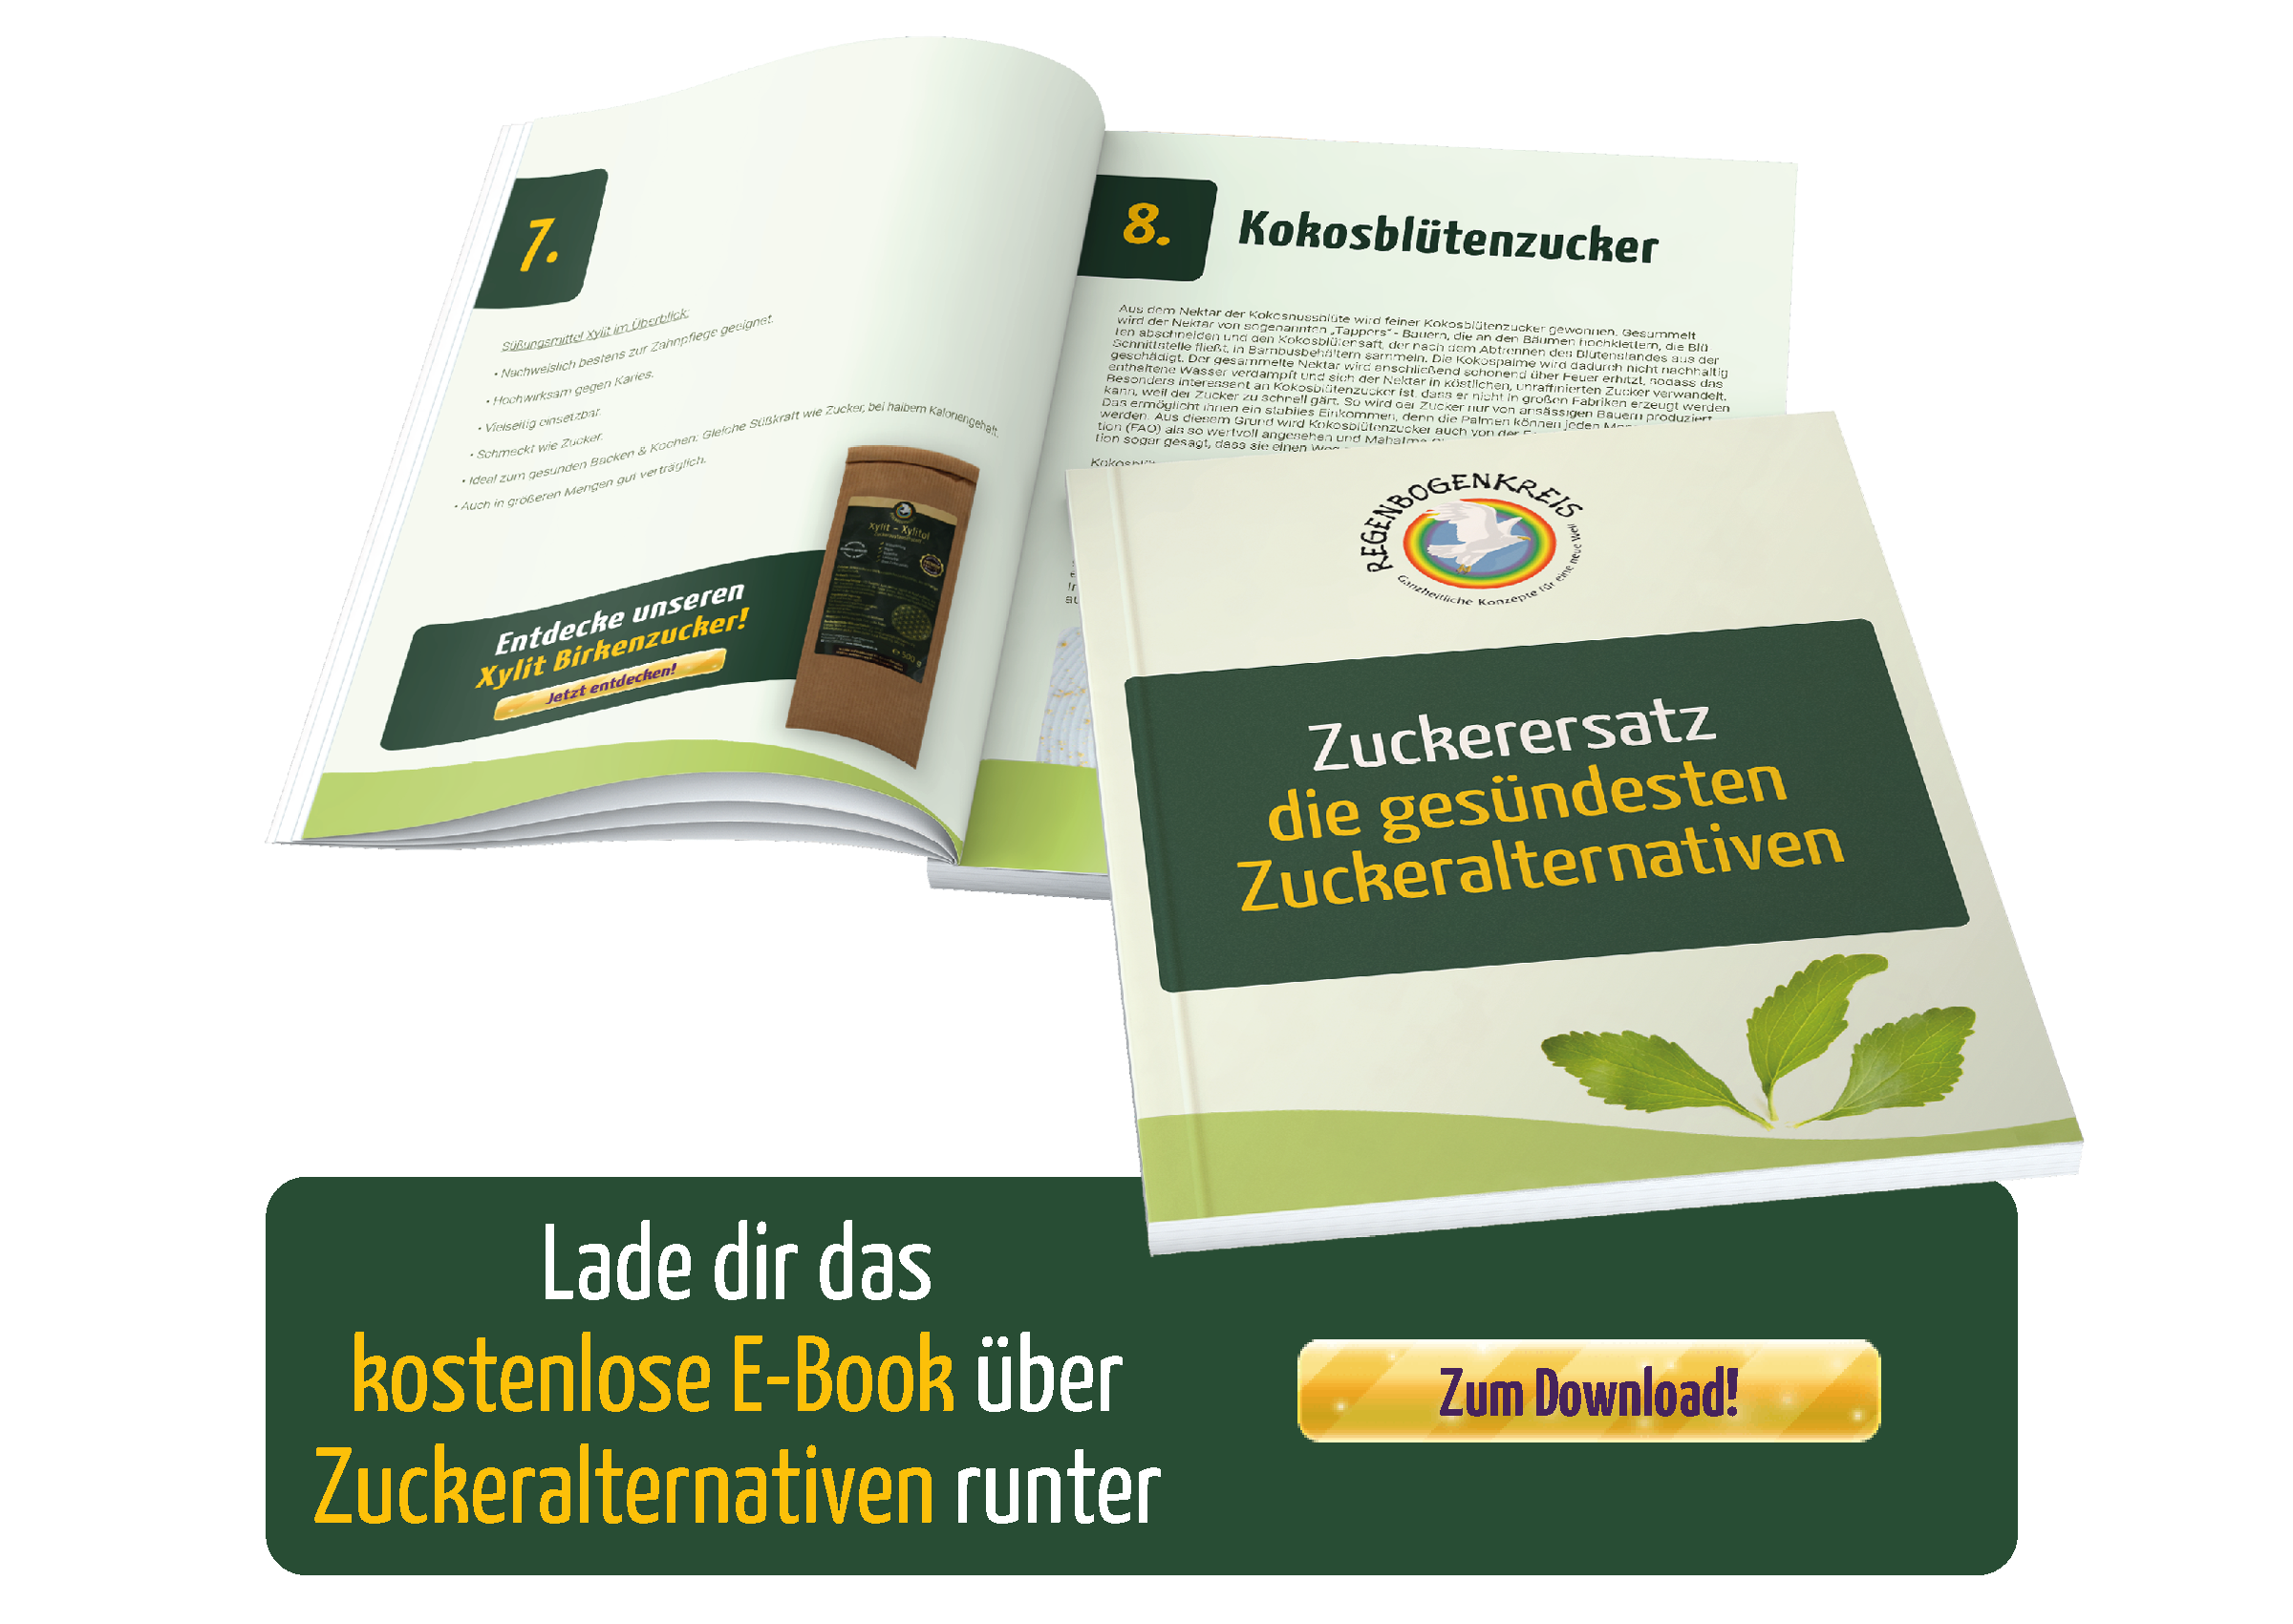 Neuer Call-to-Action